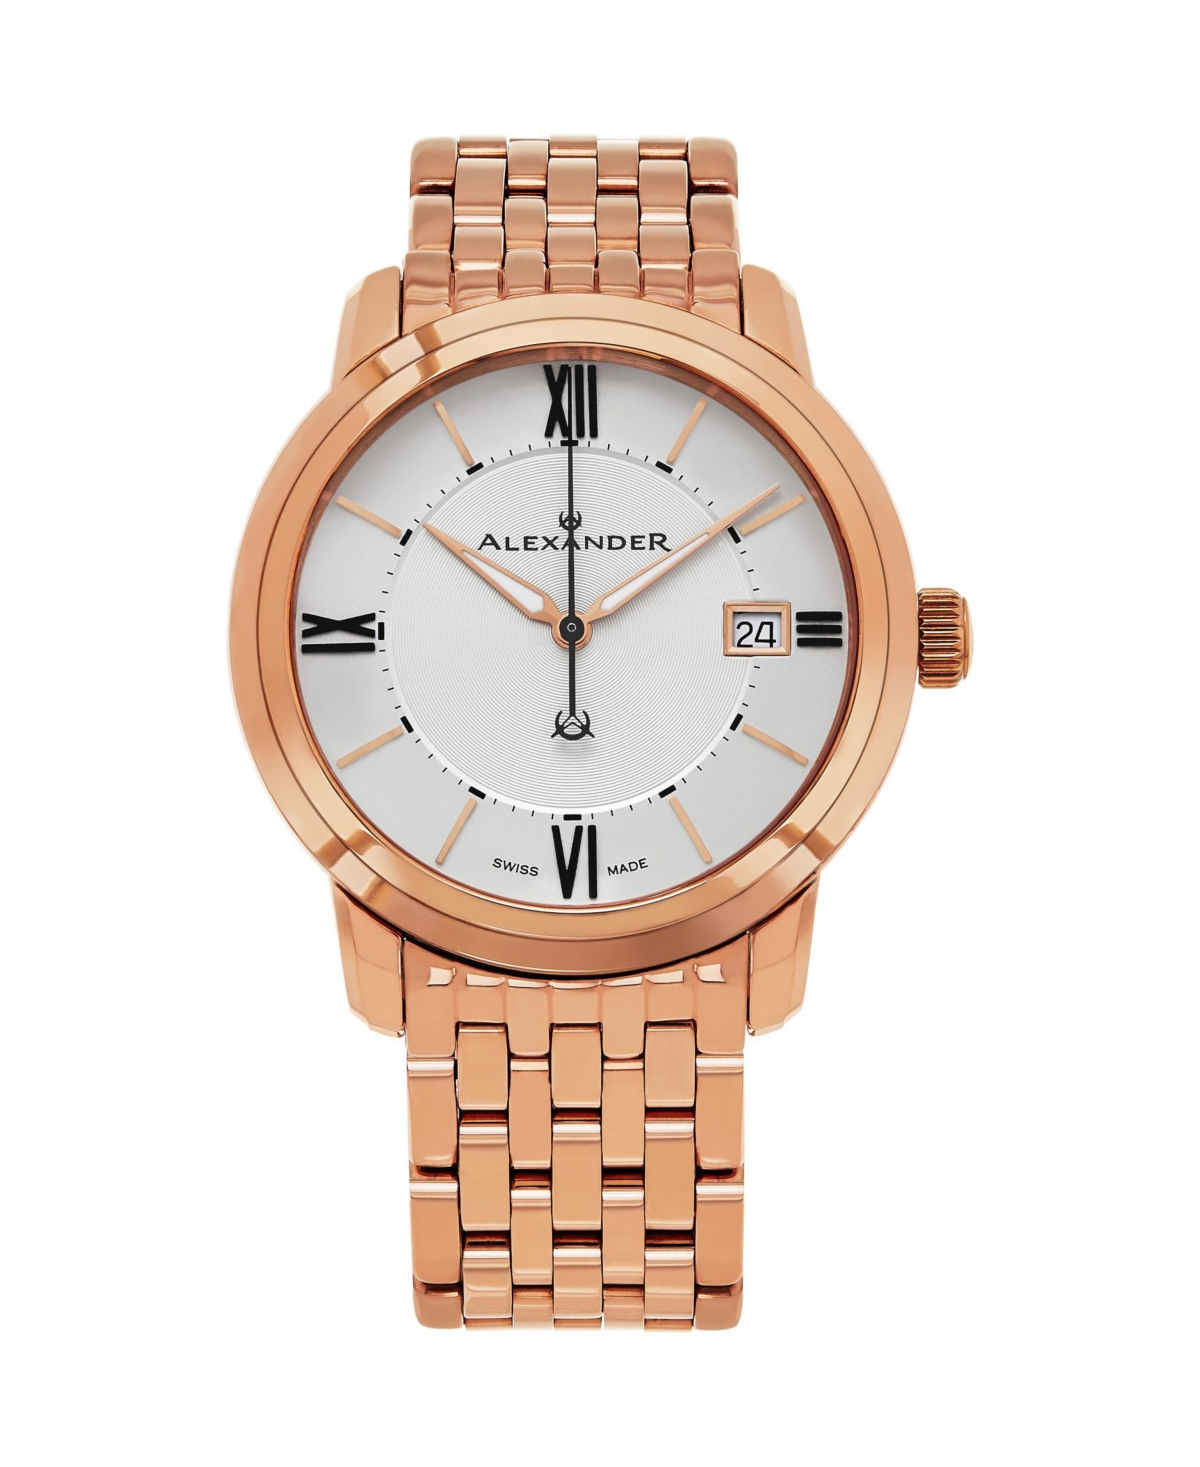 Alexander Watch A111B-08, Stainless Steel Rose Gold Tone Case on Stainless Steel Rose Gold Tone Bracelet - Rose Gold